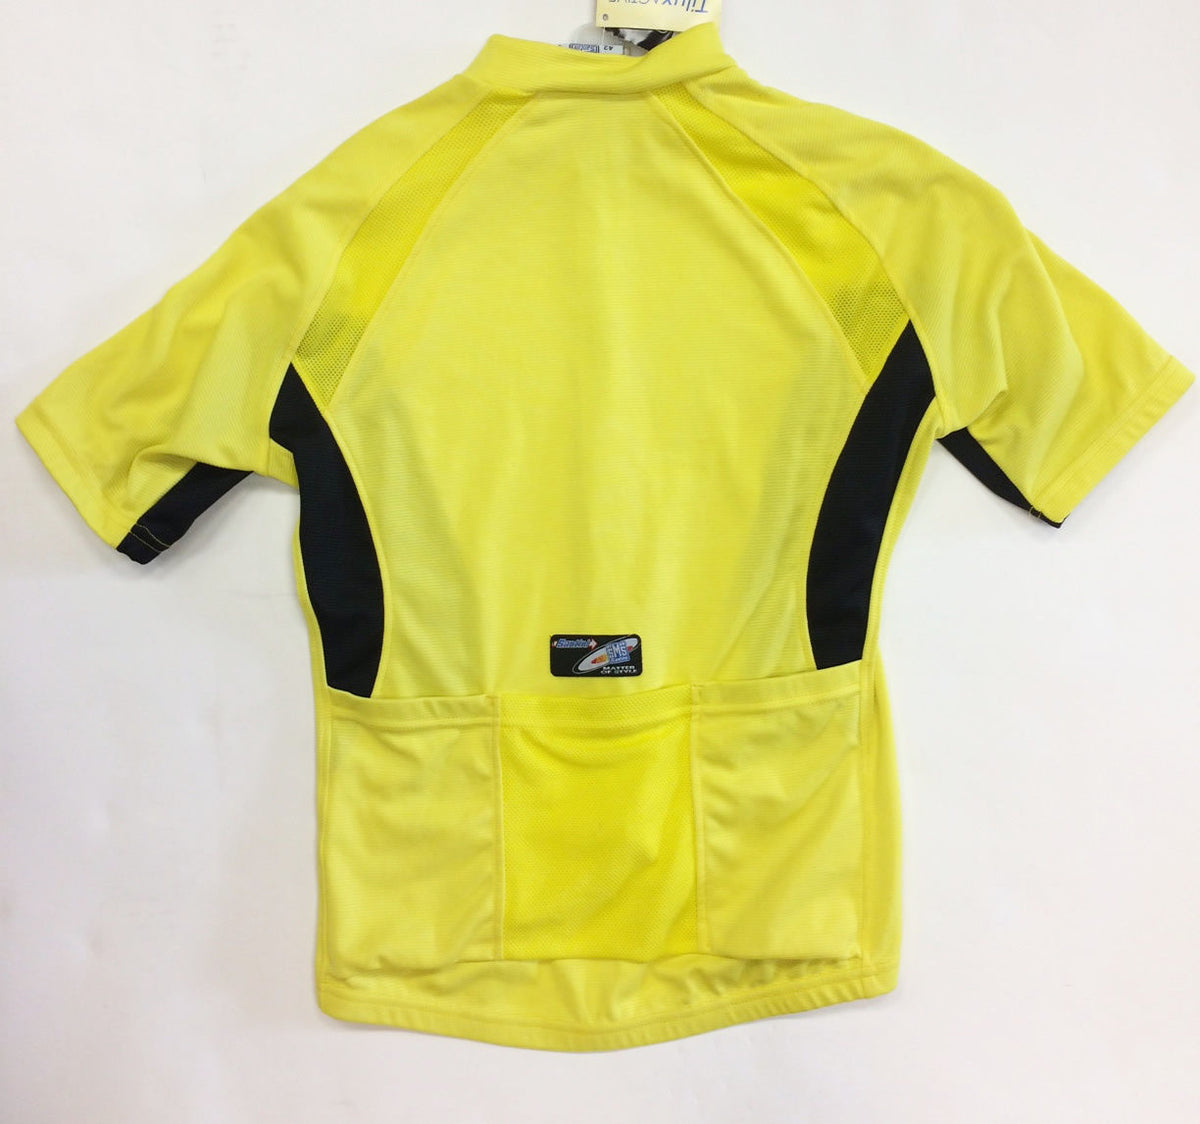 Real Cycling Short Sleeve Mens Jersey Yellow by Santini – Cento Cycling